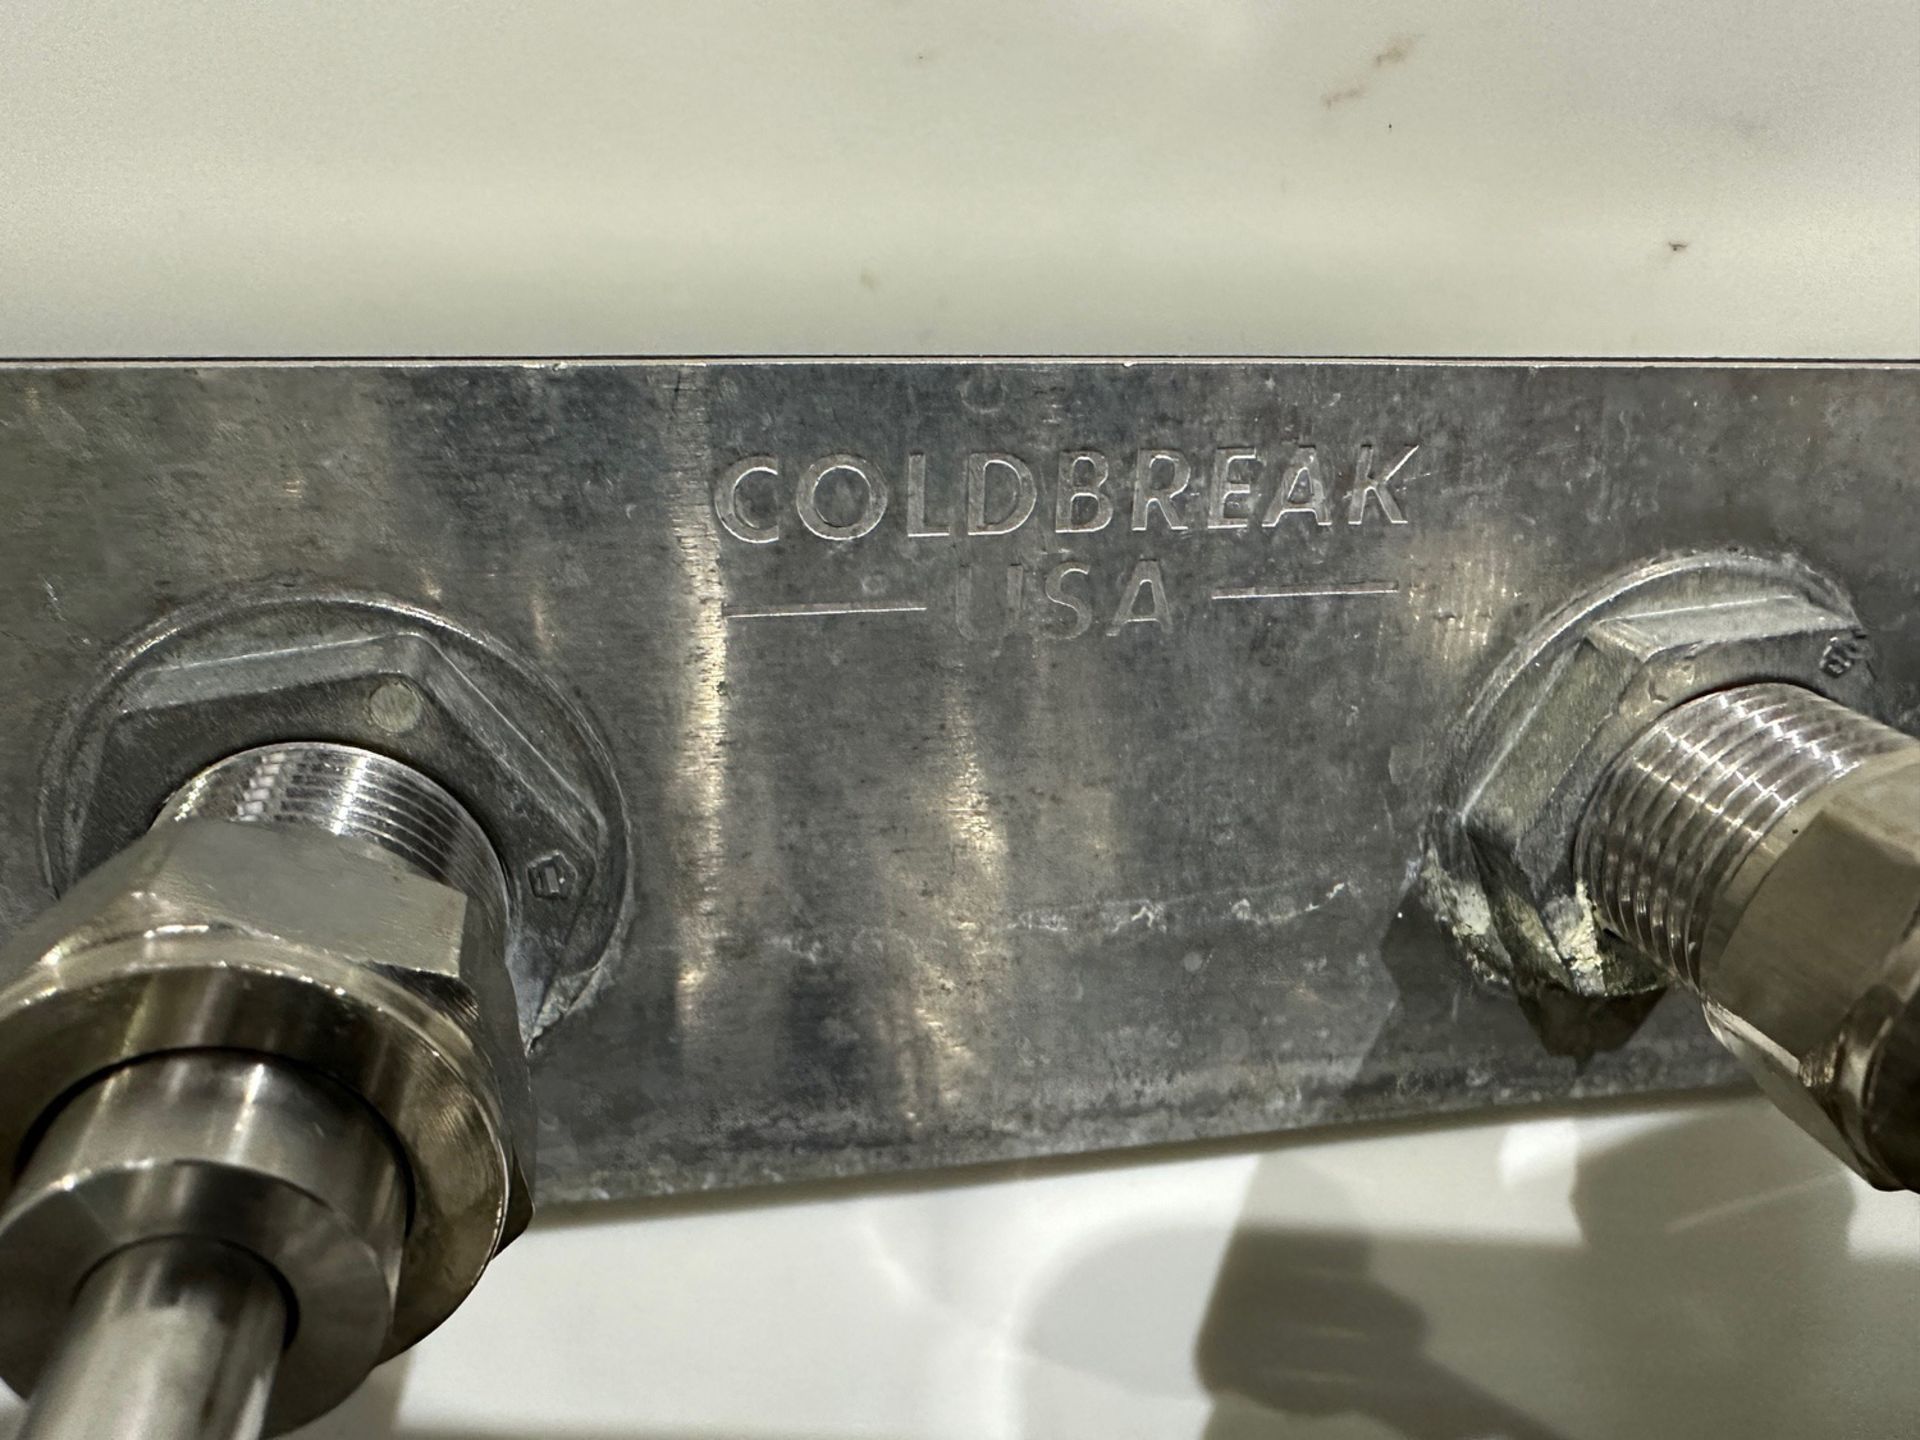 Coldbreak Stainless Steel Jockey Box with (4) Faucets | Rig Fee $20 - Image 3 of 3